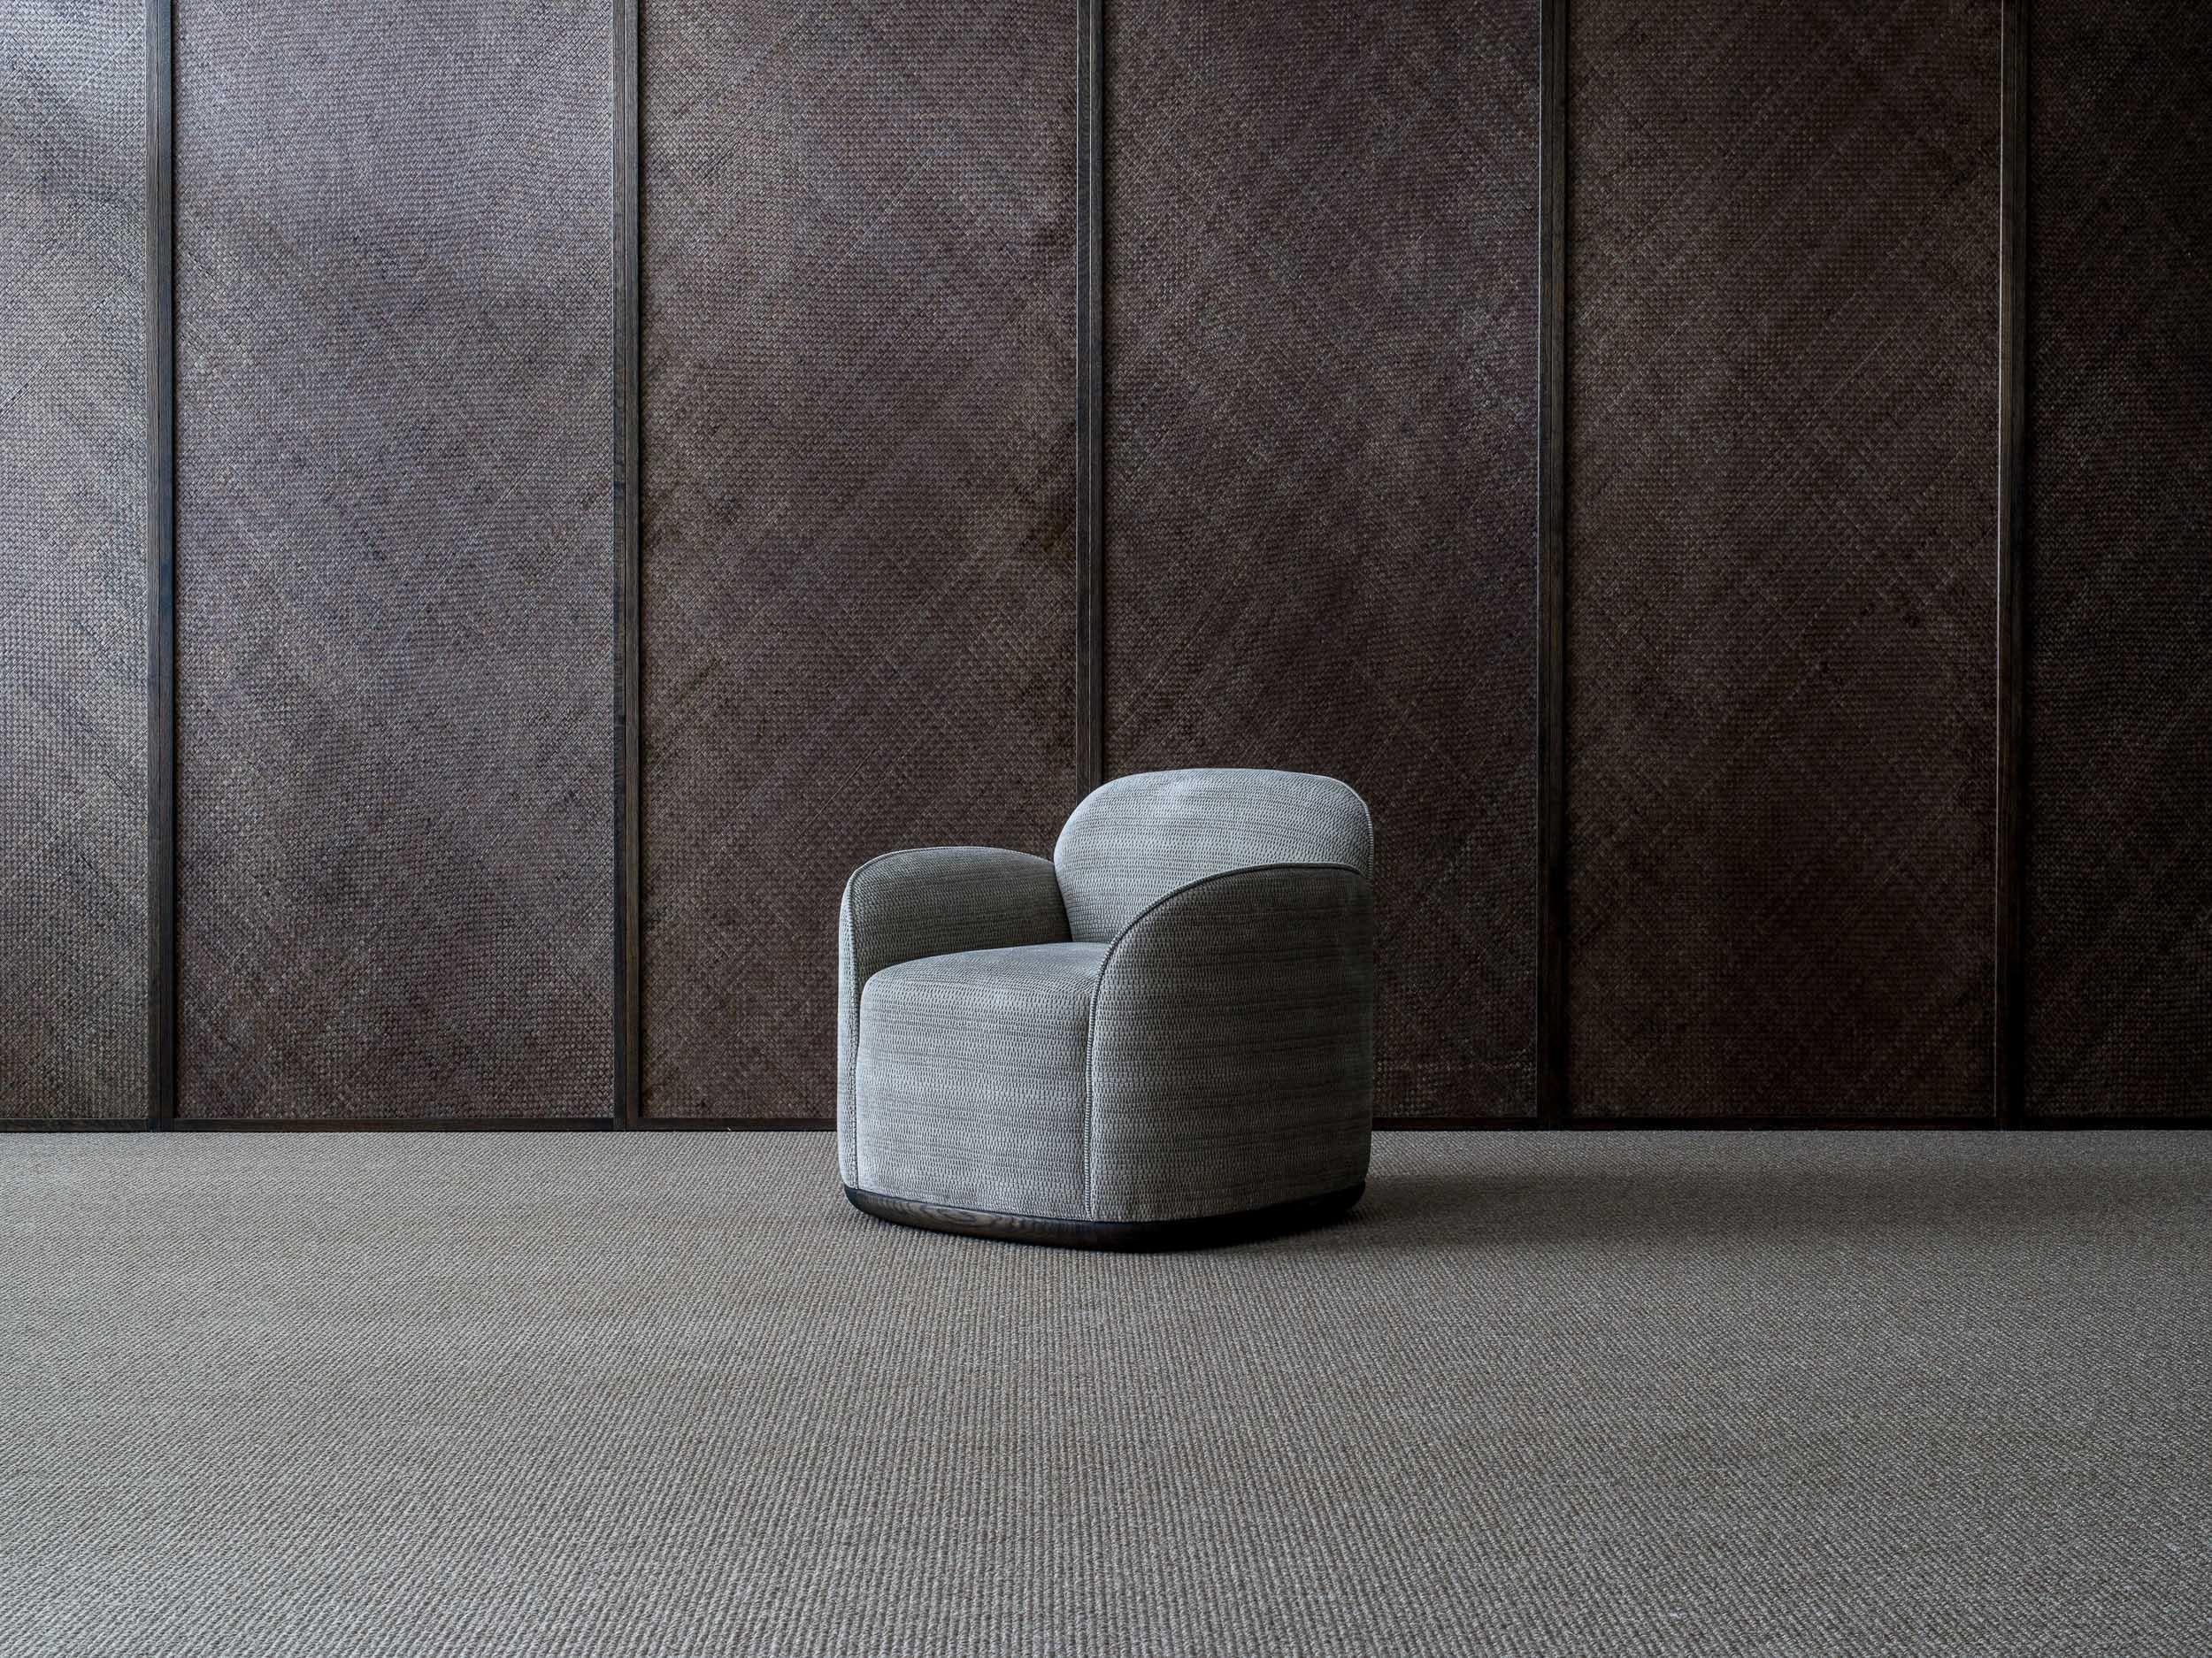 Unio armchair by Poiat 
Designers: Timo Mikkonen & Antti Rouhunkoski 

Collection UNIO 2021

Dimensions: H. 72 x W. 75 D. 72 SH. 40
Model shown: Cat 3. Hanoi 04 - Pierre Frey
 
The Unio Collection, featuring an armchair and sofas, opens a